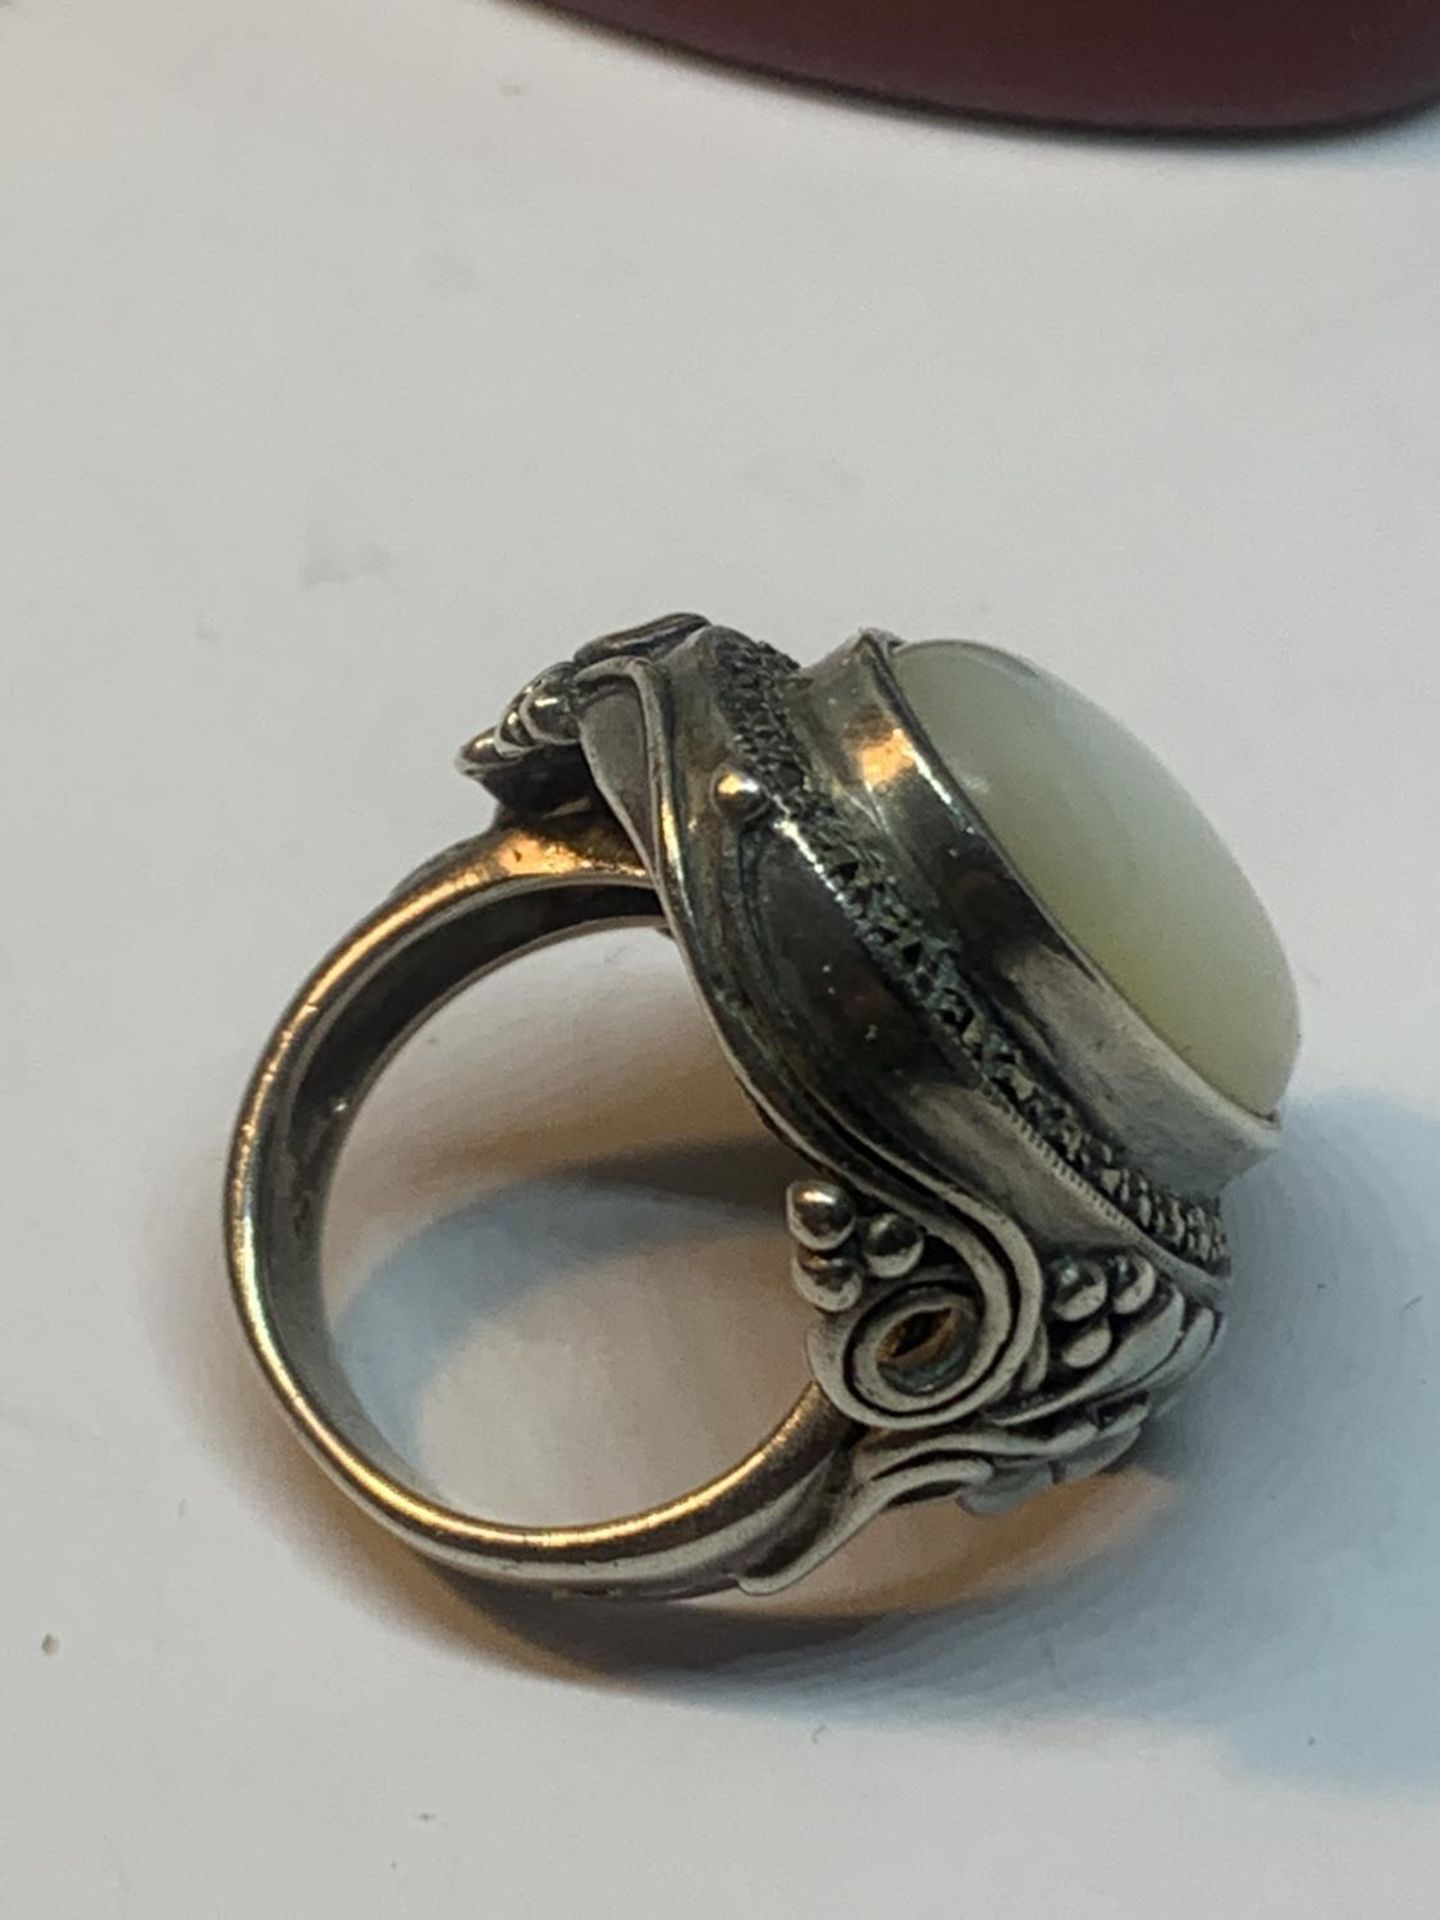 A LARGE SILVER DRESS RING WITH WHITE OPAL COLOURED STONE IN A PRESENTATION BOX - Image 2 of 2